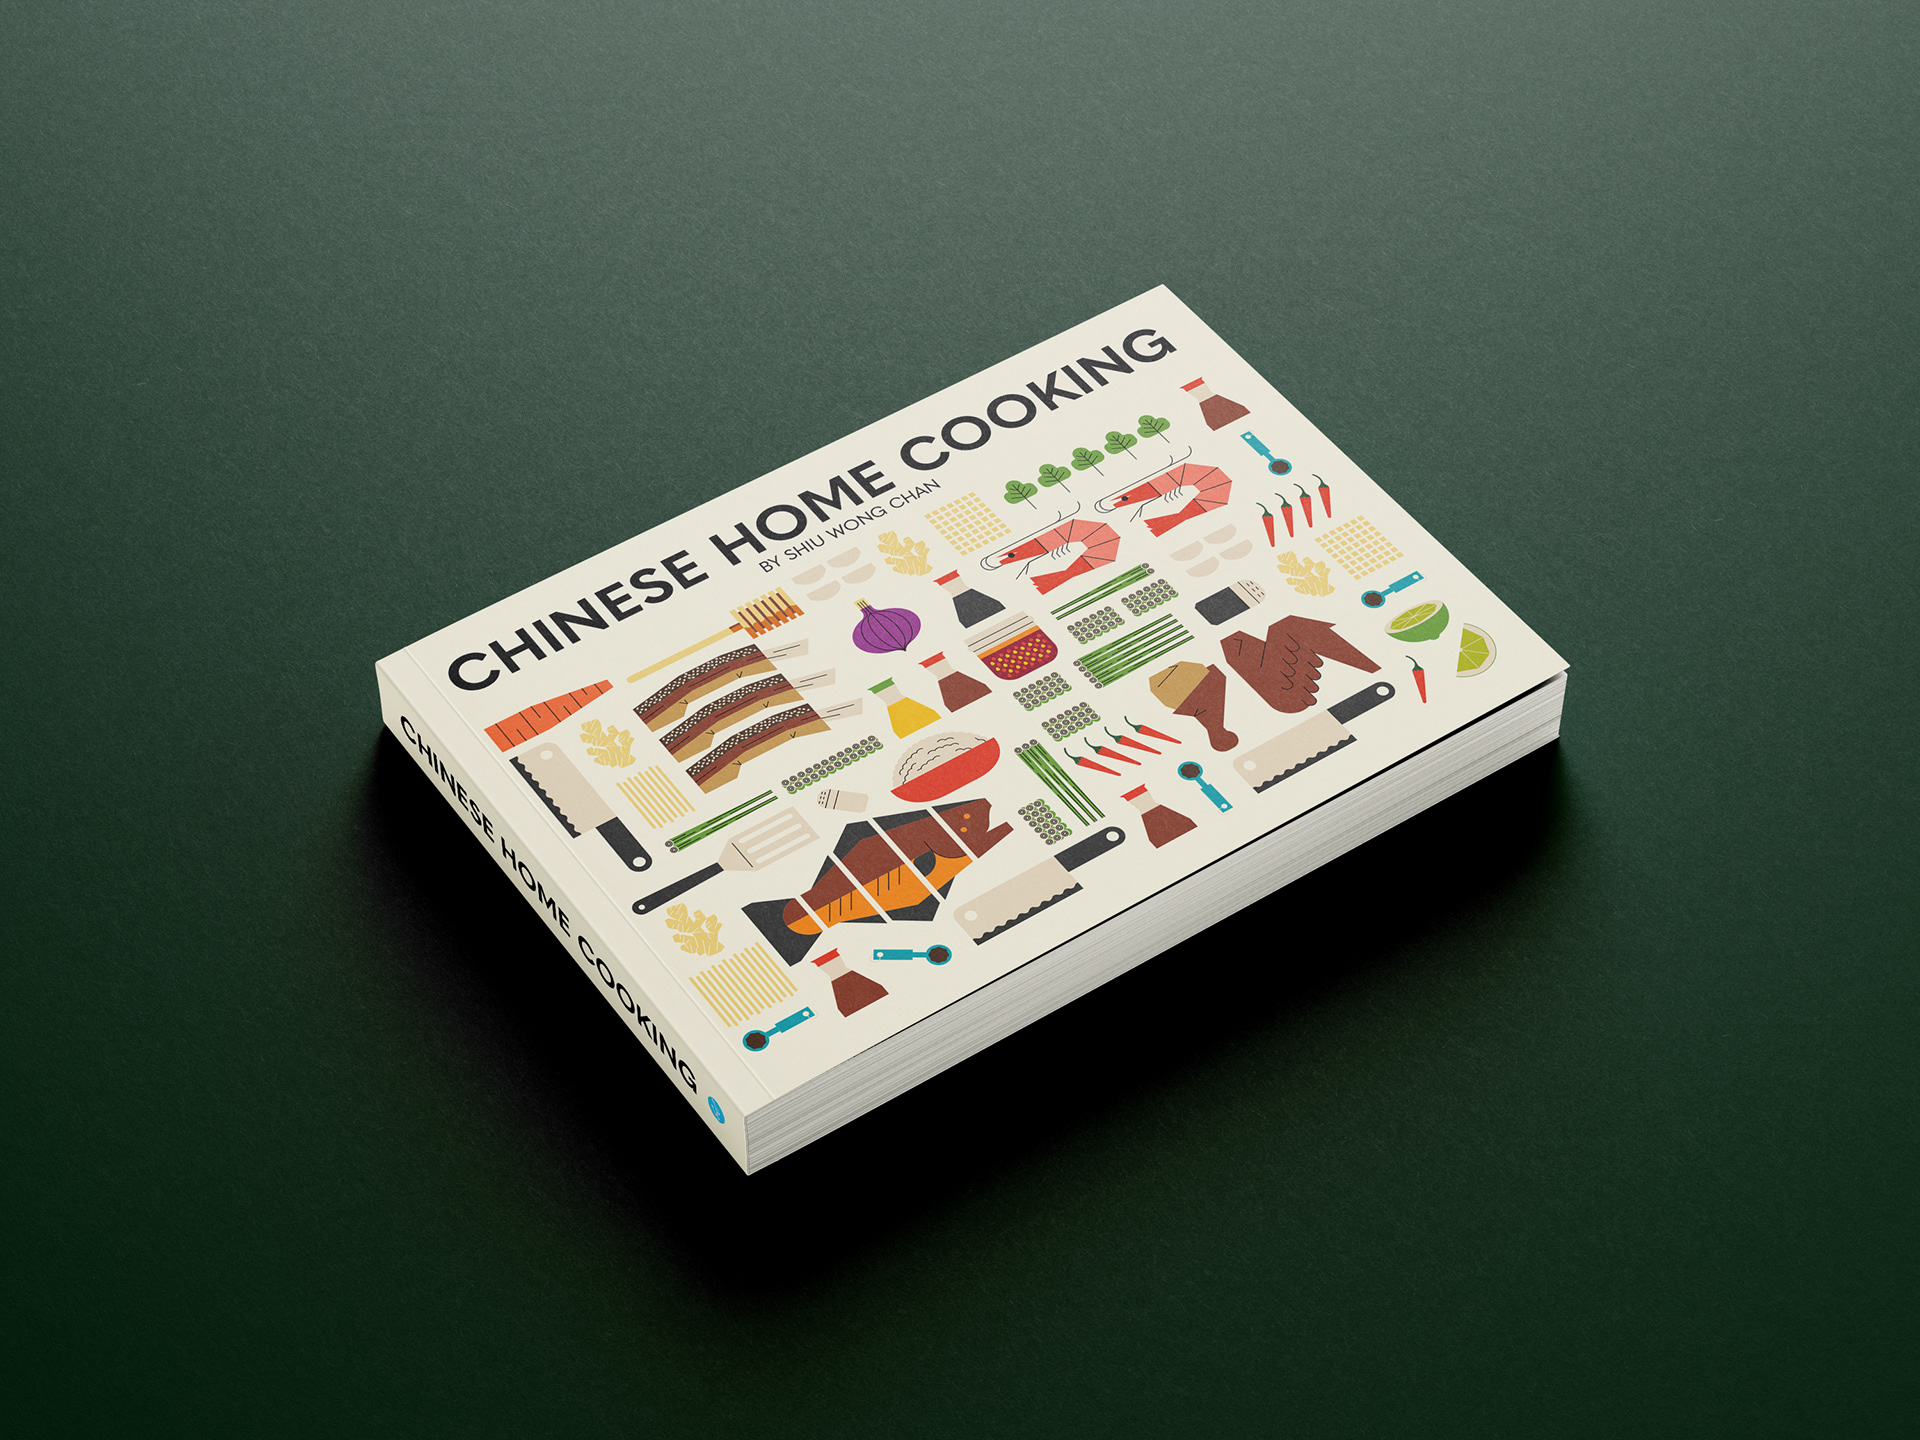 "Chinese Home Cooking" by Artur V. Un